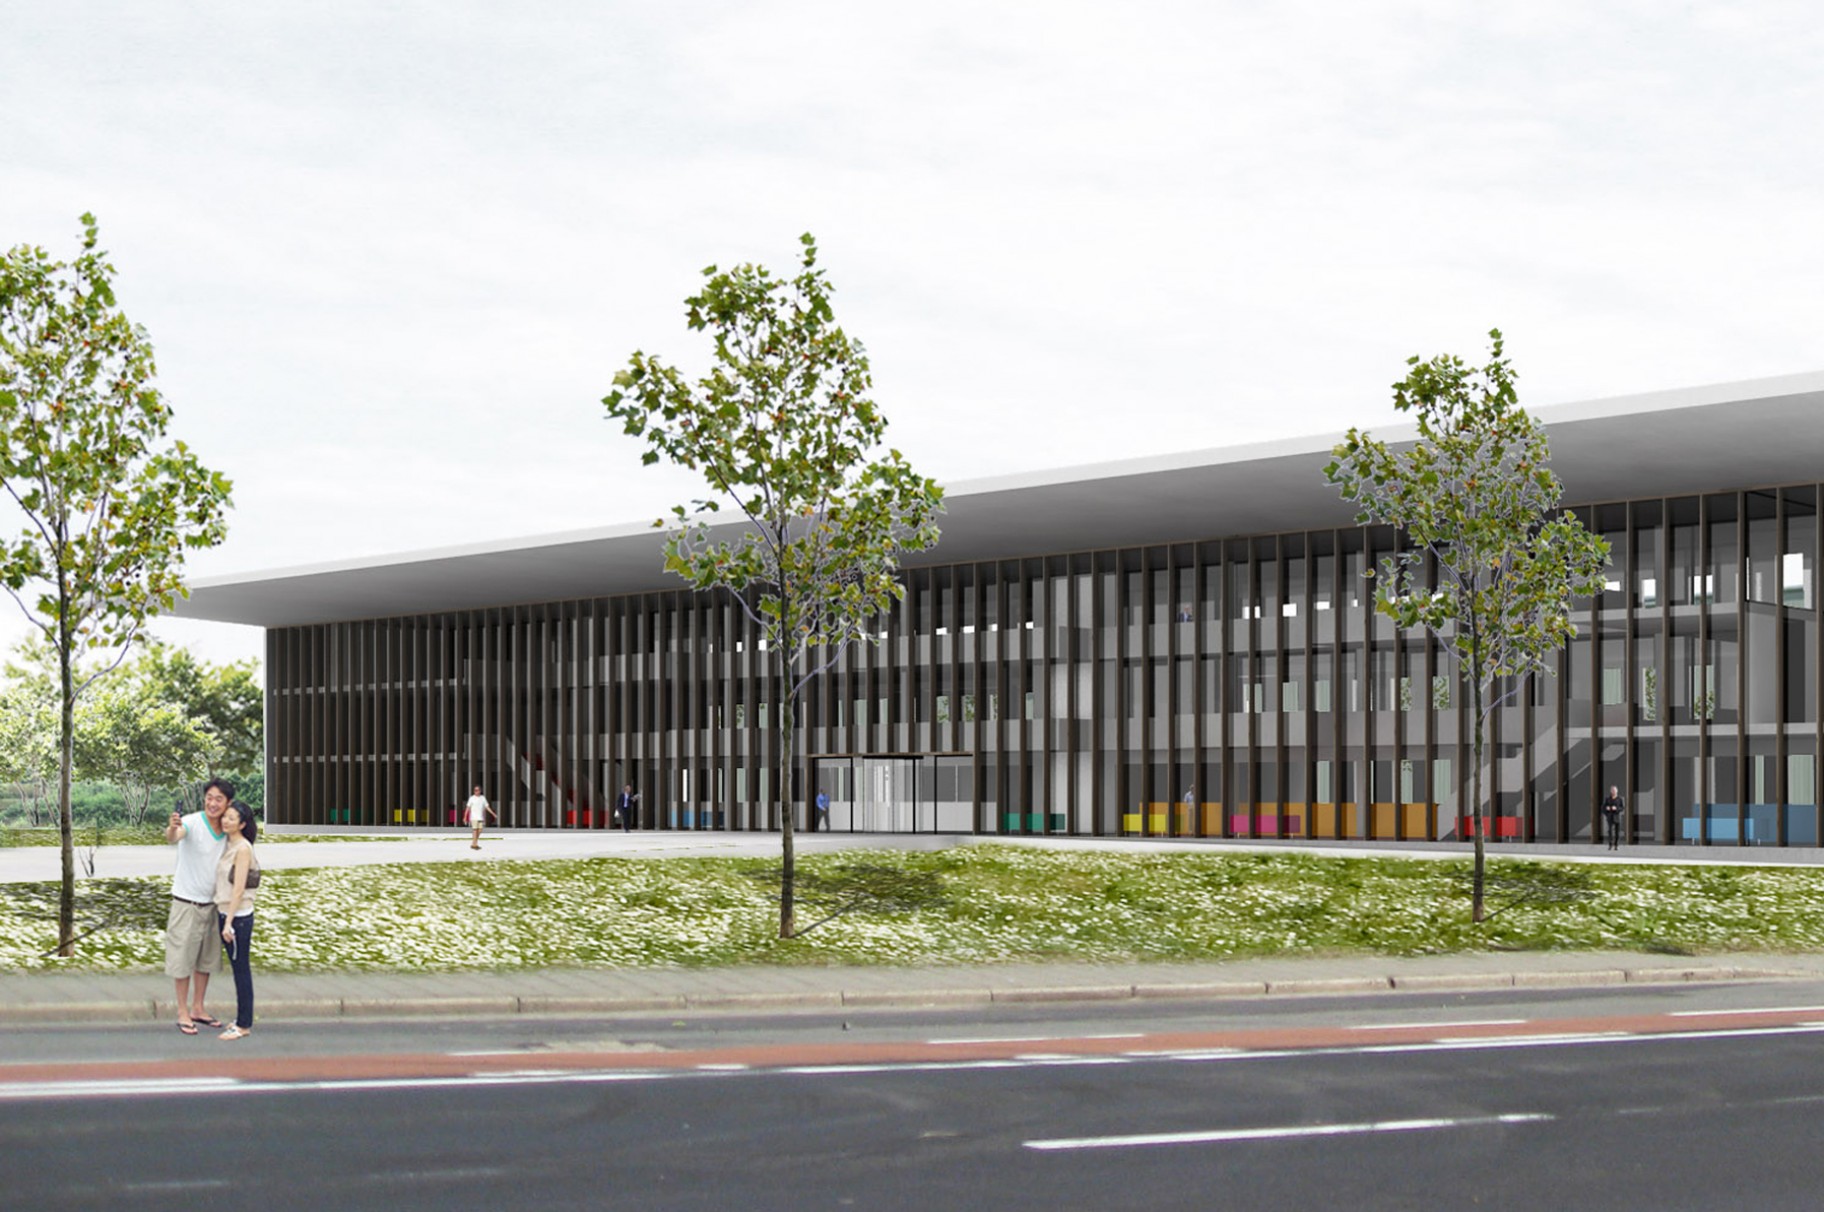 Competition Administratief Centrum Oostkamp submitted